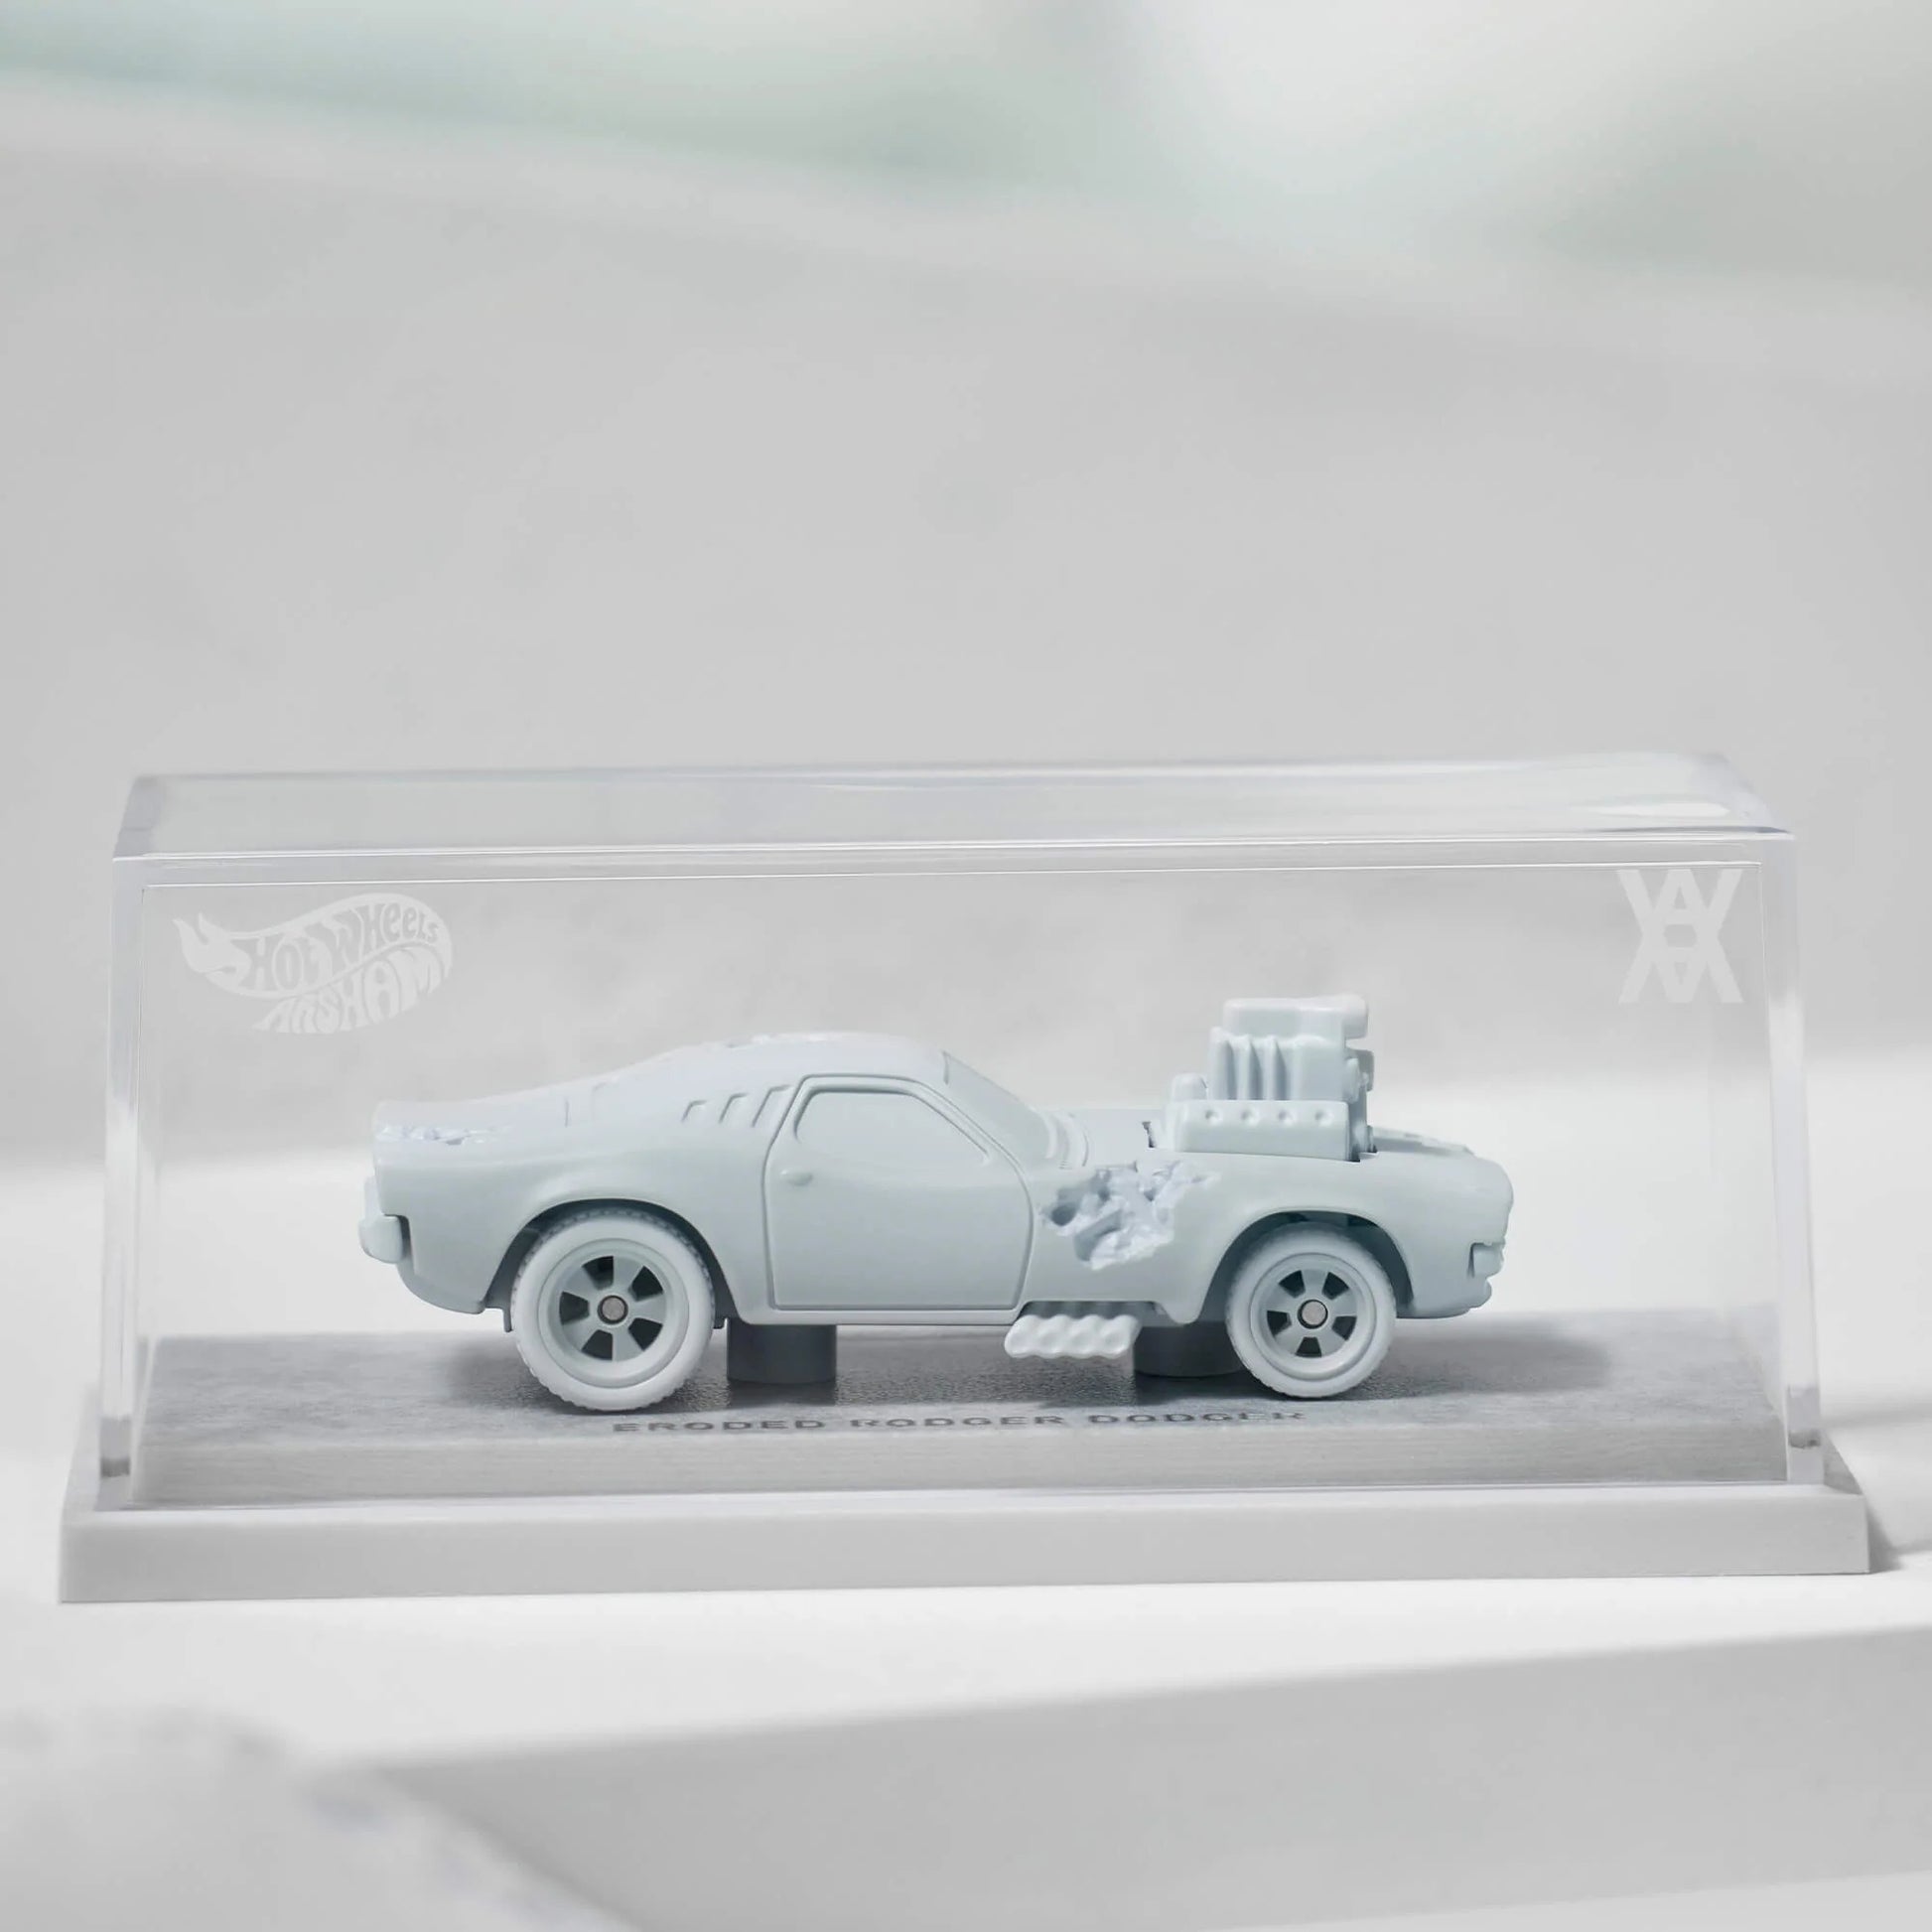 Daniel Arsham x Hot Wheels Eroded Rodger Dodger, 2023 Features: Sculpted crystallized erosions Body Color: Arsham Blue Body Type: Silkstone Chassis: ZAMAC Interior: ZAMAC Wheels: Real Riders wheels Scale 1:64 Includes sealing label and Certificate of Authenticity Packaged in a collector display case with simulated concrete base.